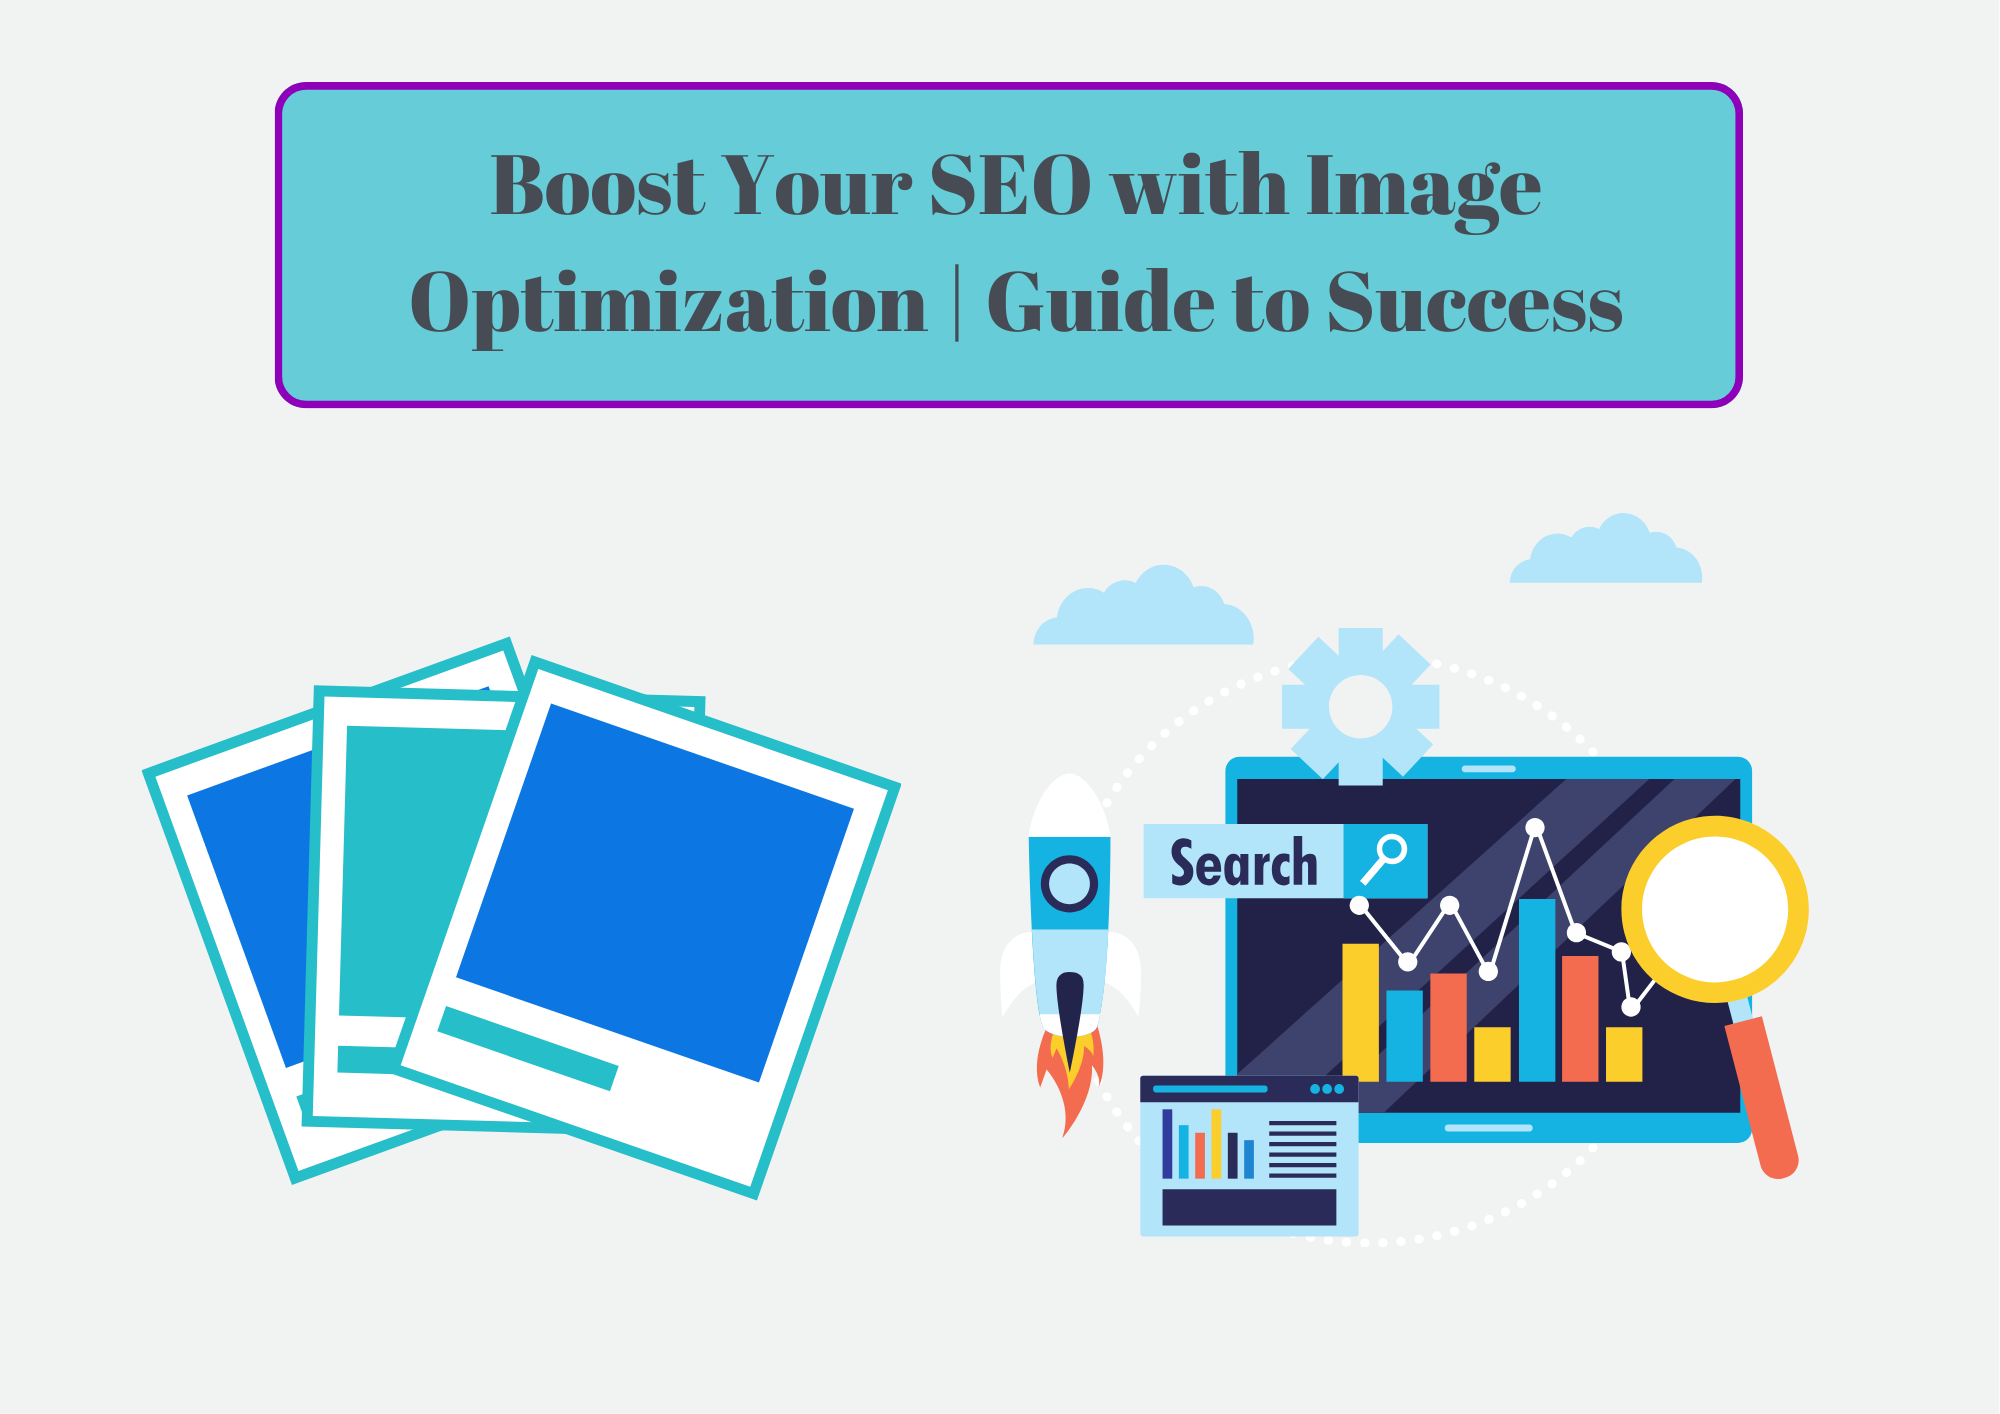 Boost Your SEO with Image Optimization Guide to Success